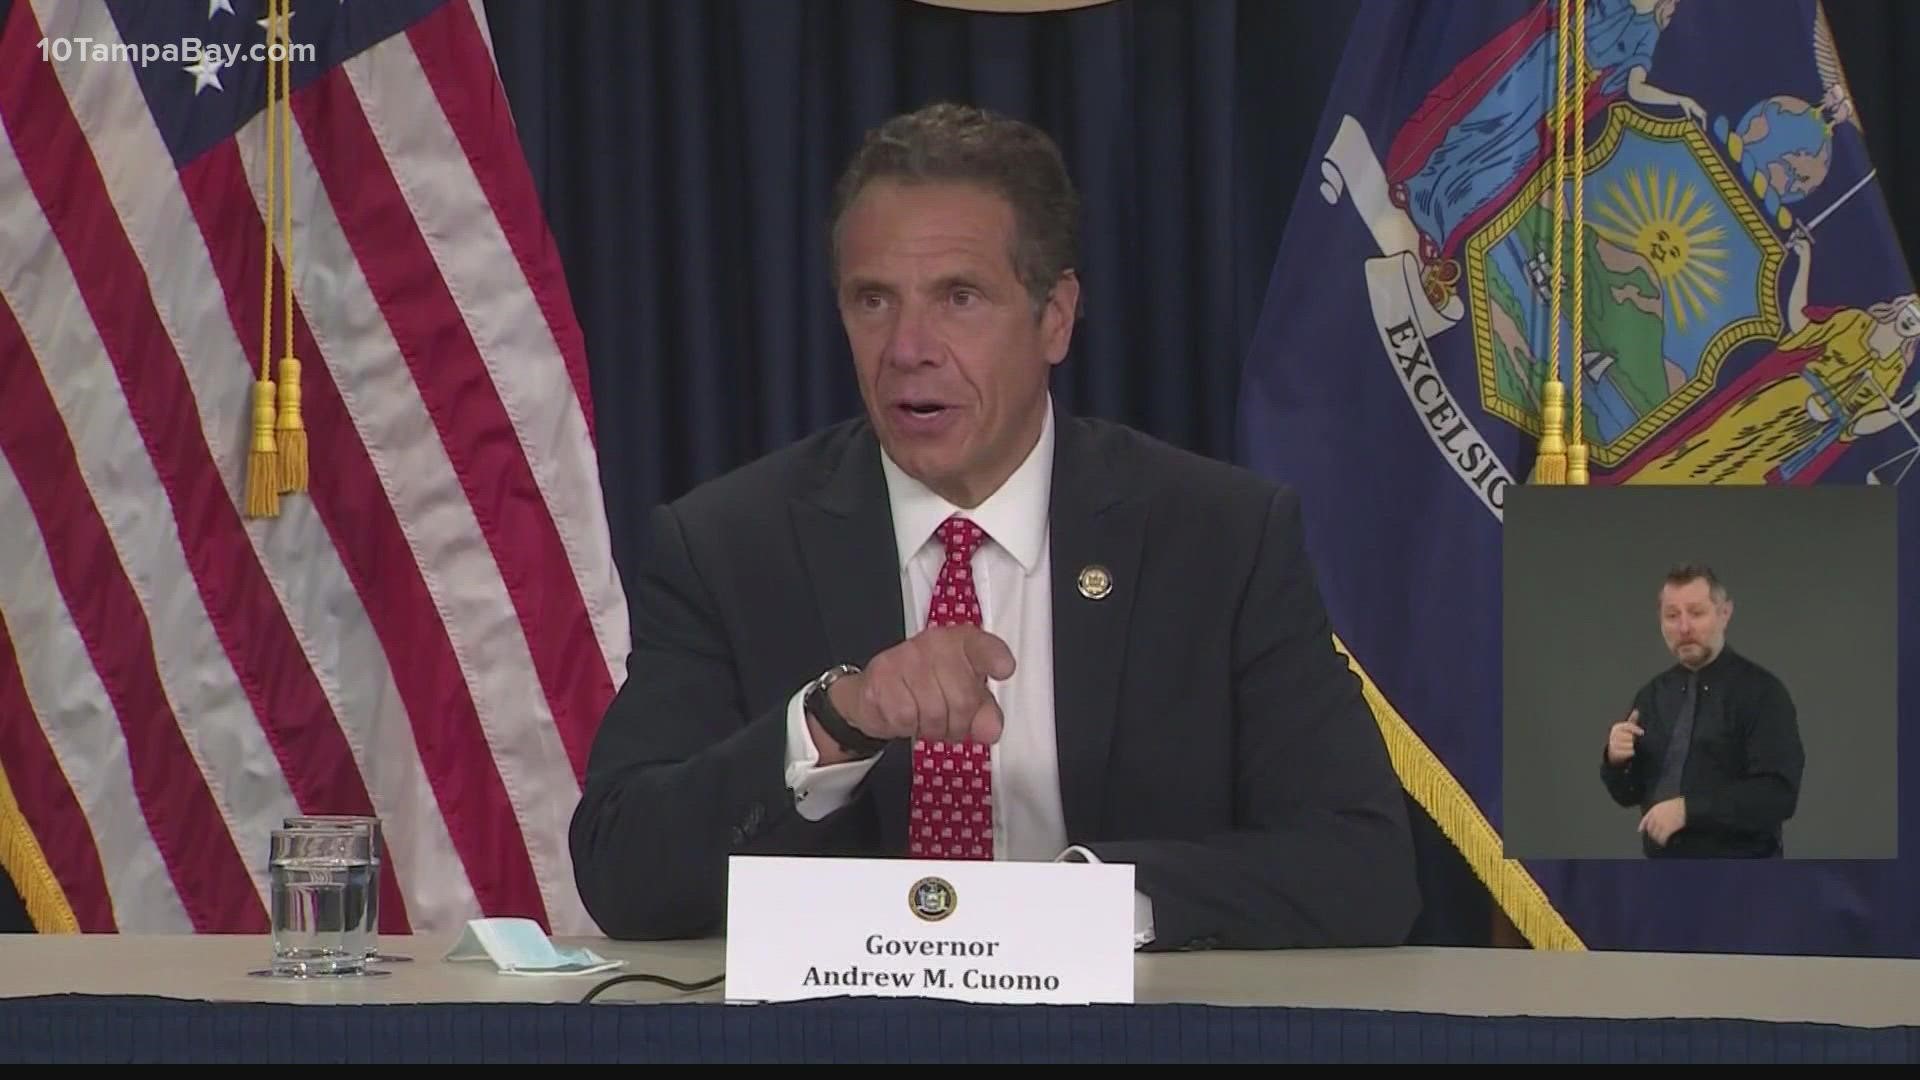 The 168 page general report details that Cuomo sexually harassed current and former state employees.